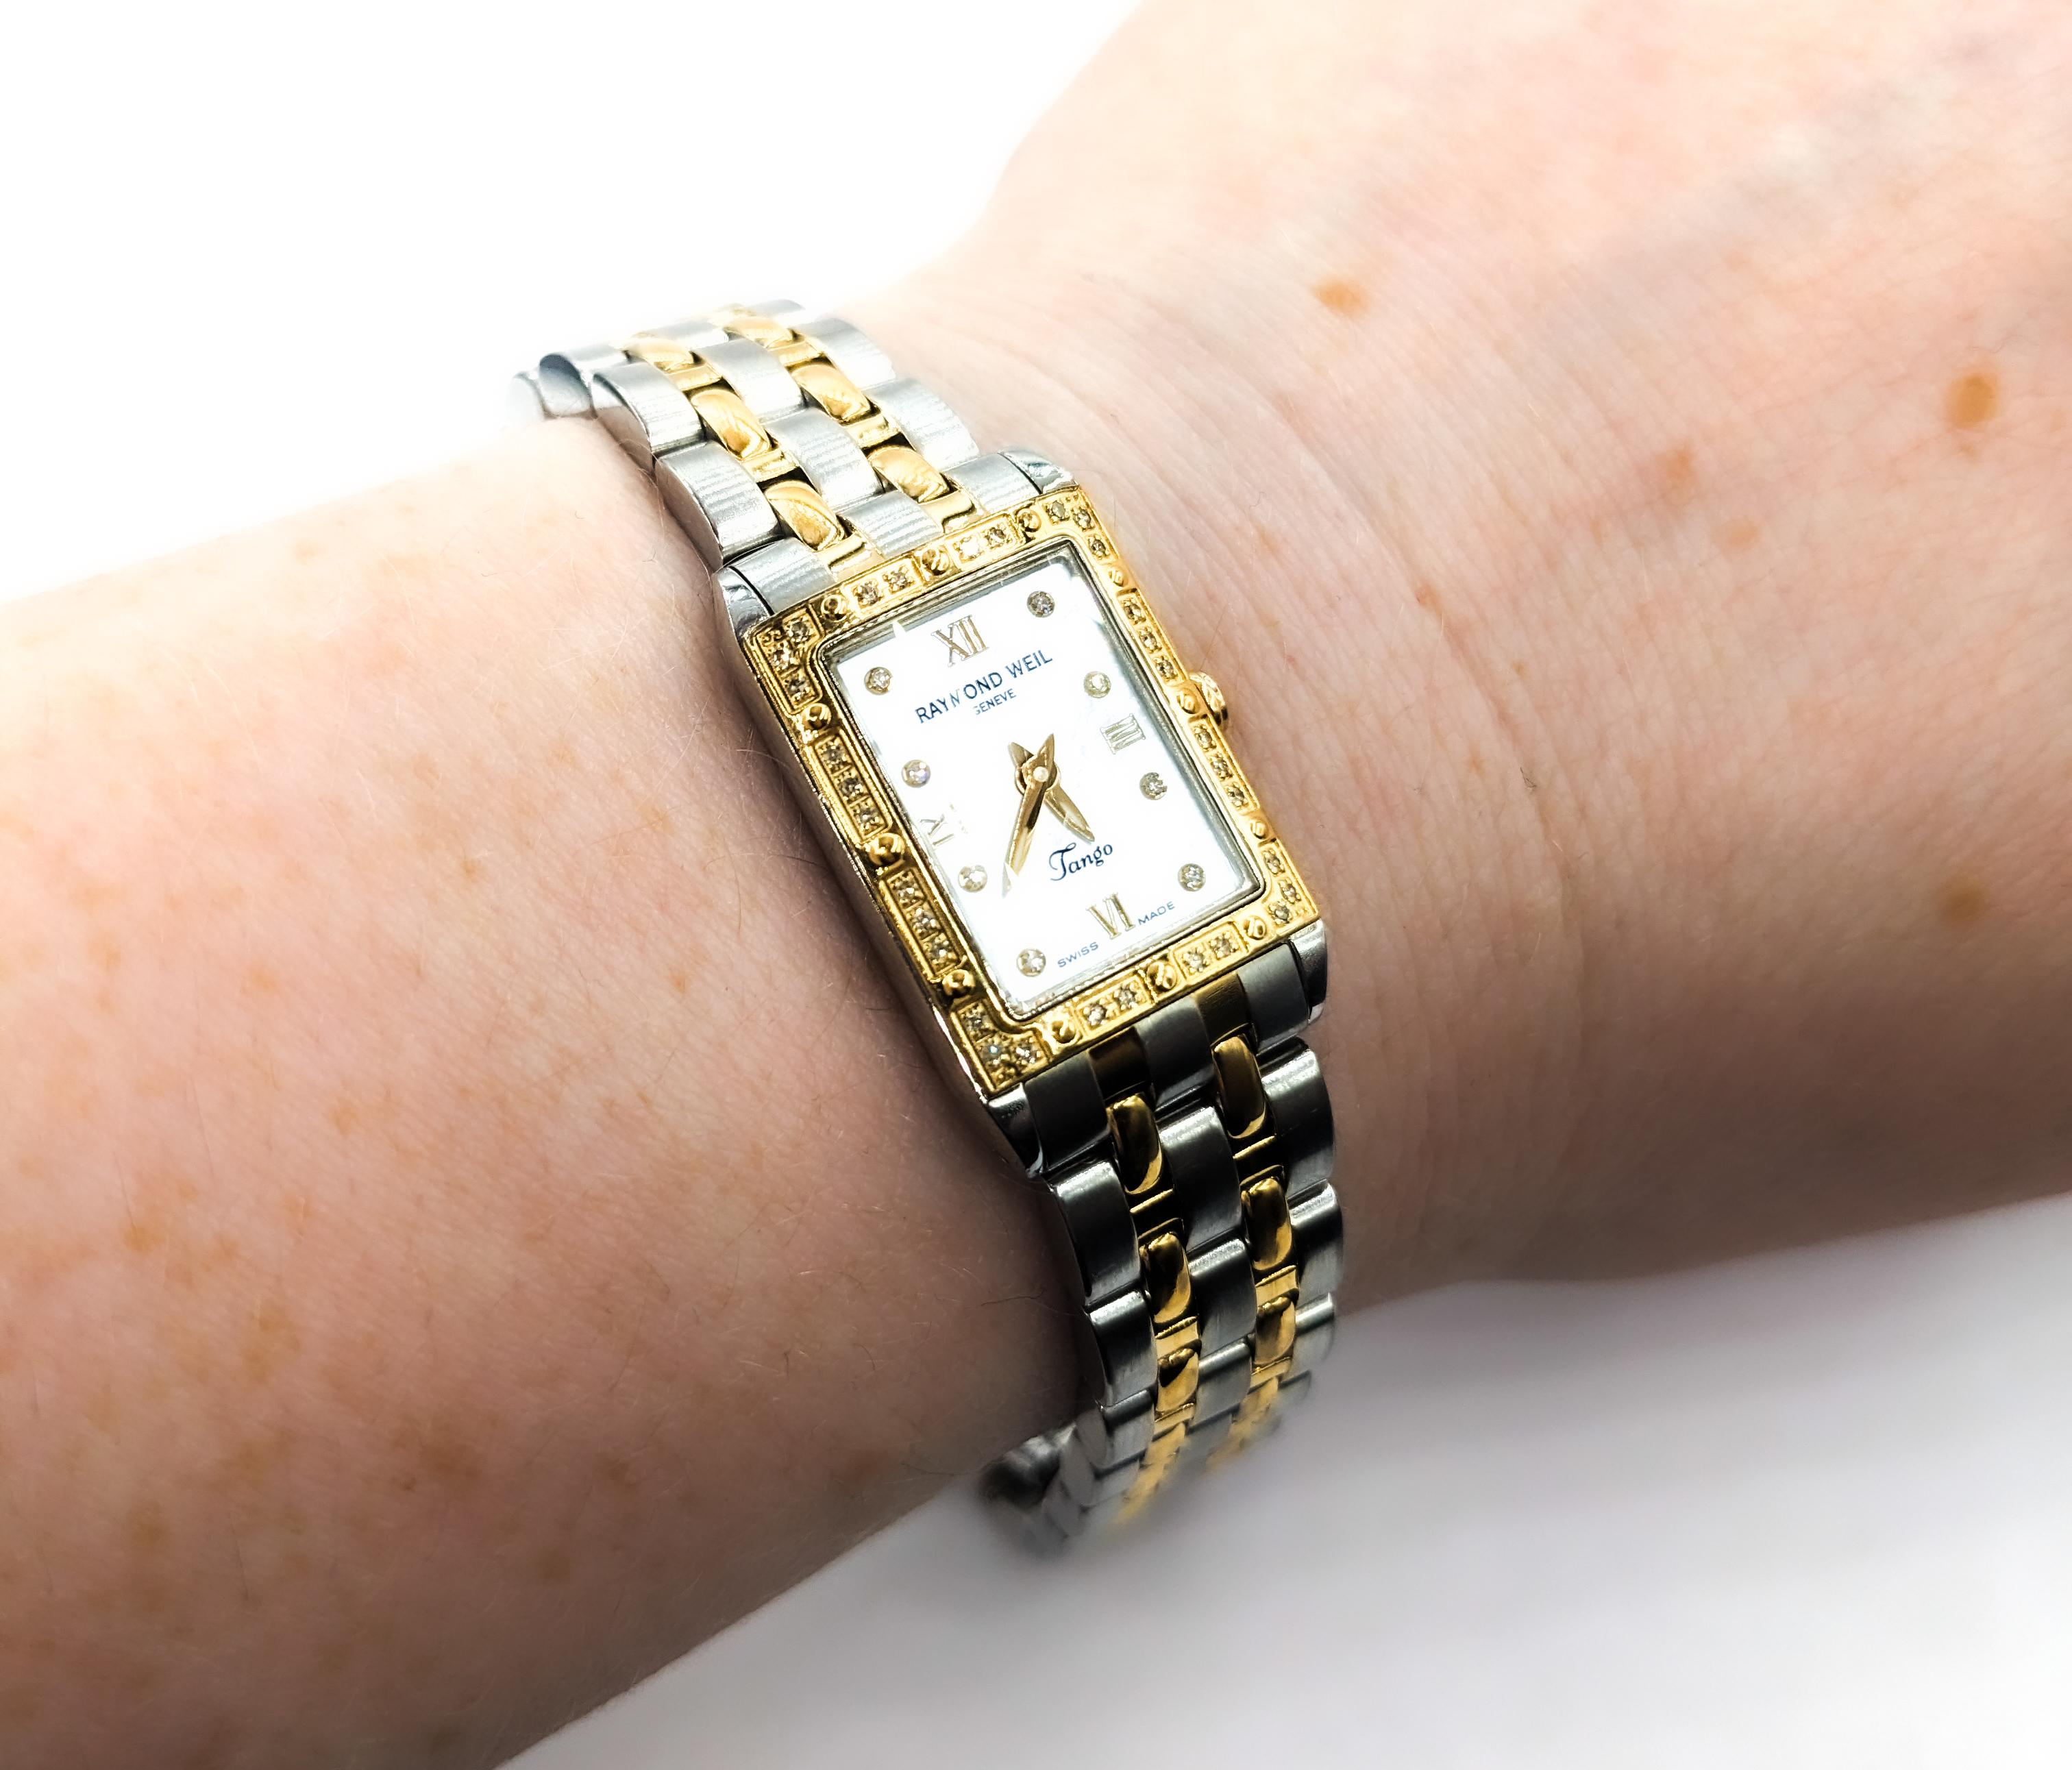 Women's Raymond Weil Two Tone Watch In Stainless Steel



Introducing the elegant Raymond Weil Two Tone Women's Watch, a luxurious timepiece that combines functionality with exquisite style. This watch is beautifully crafted in stainless steel and